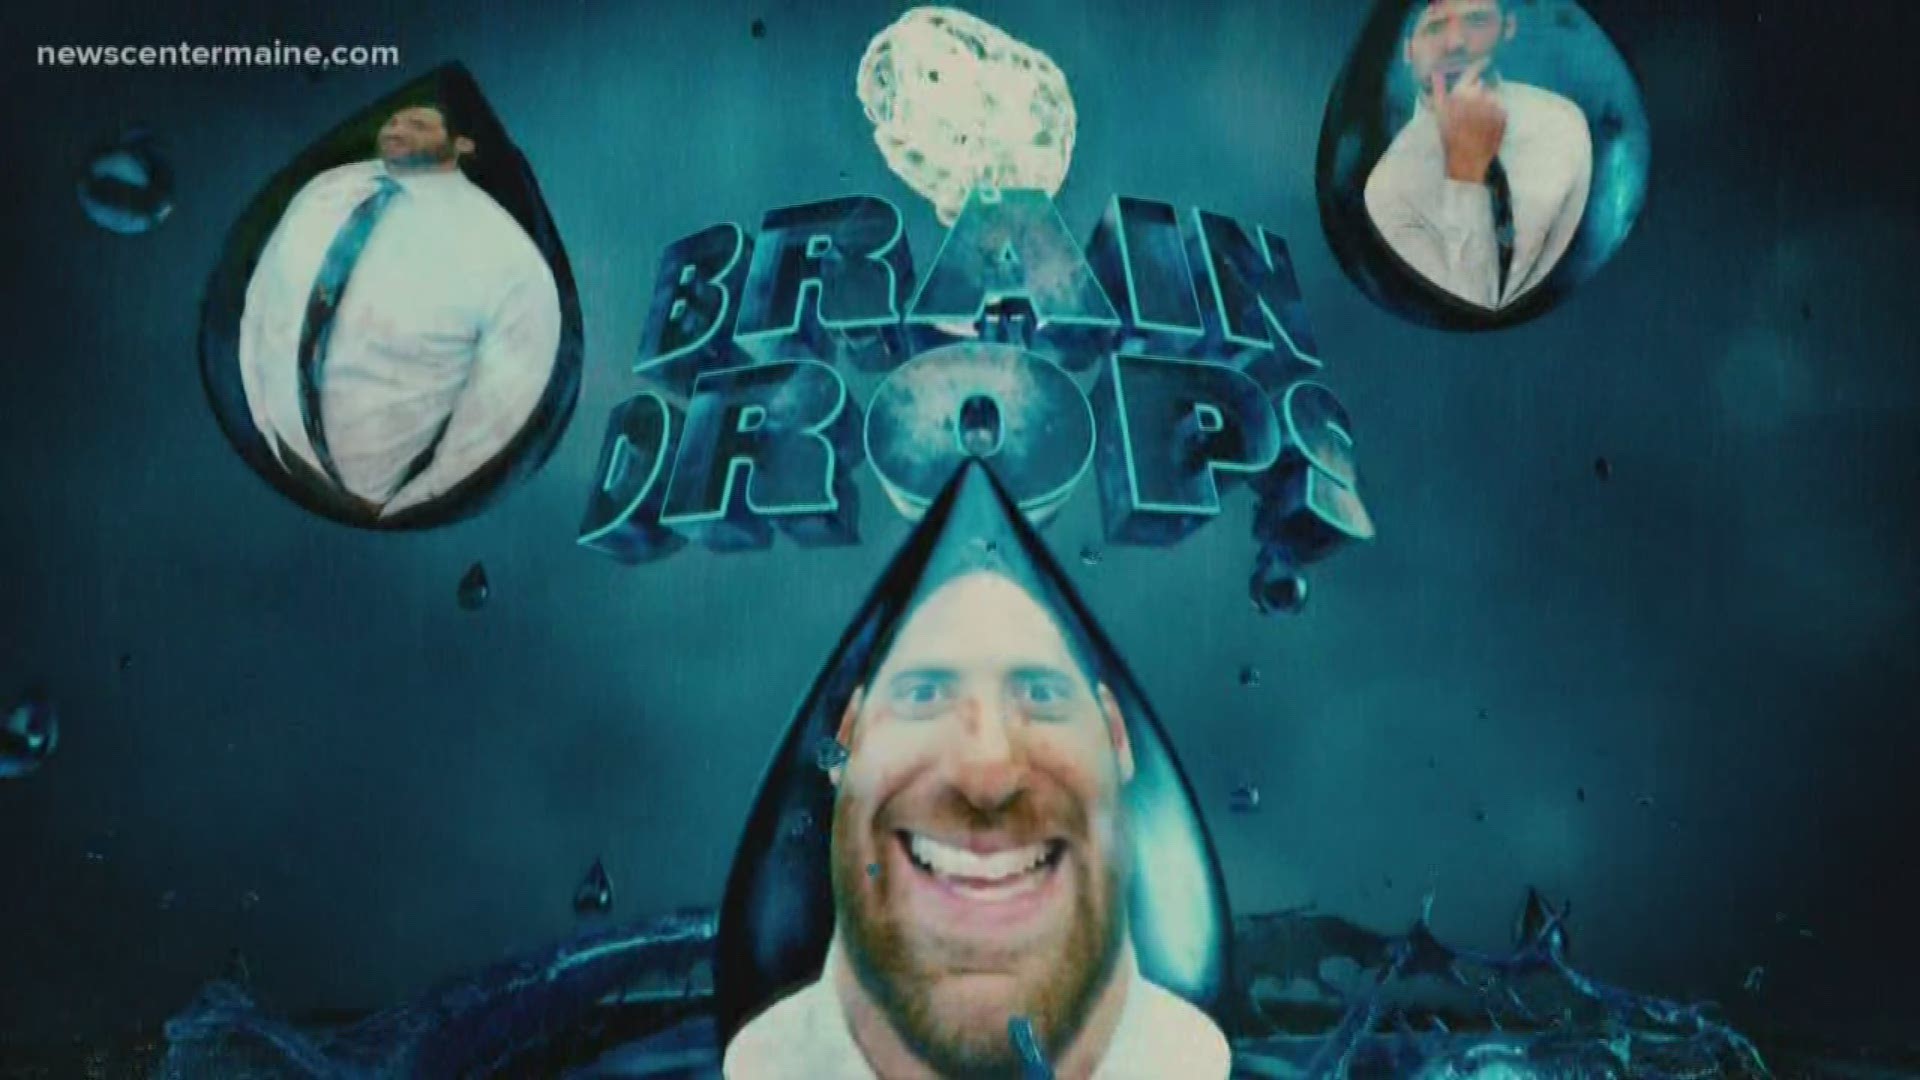 BrainDrops: "Dirty Thunderstorms"